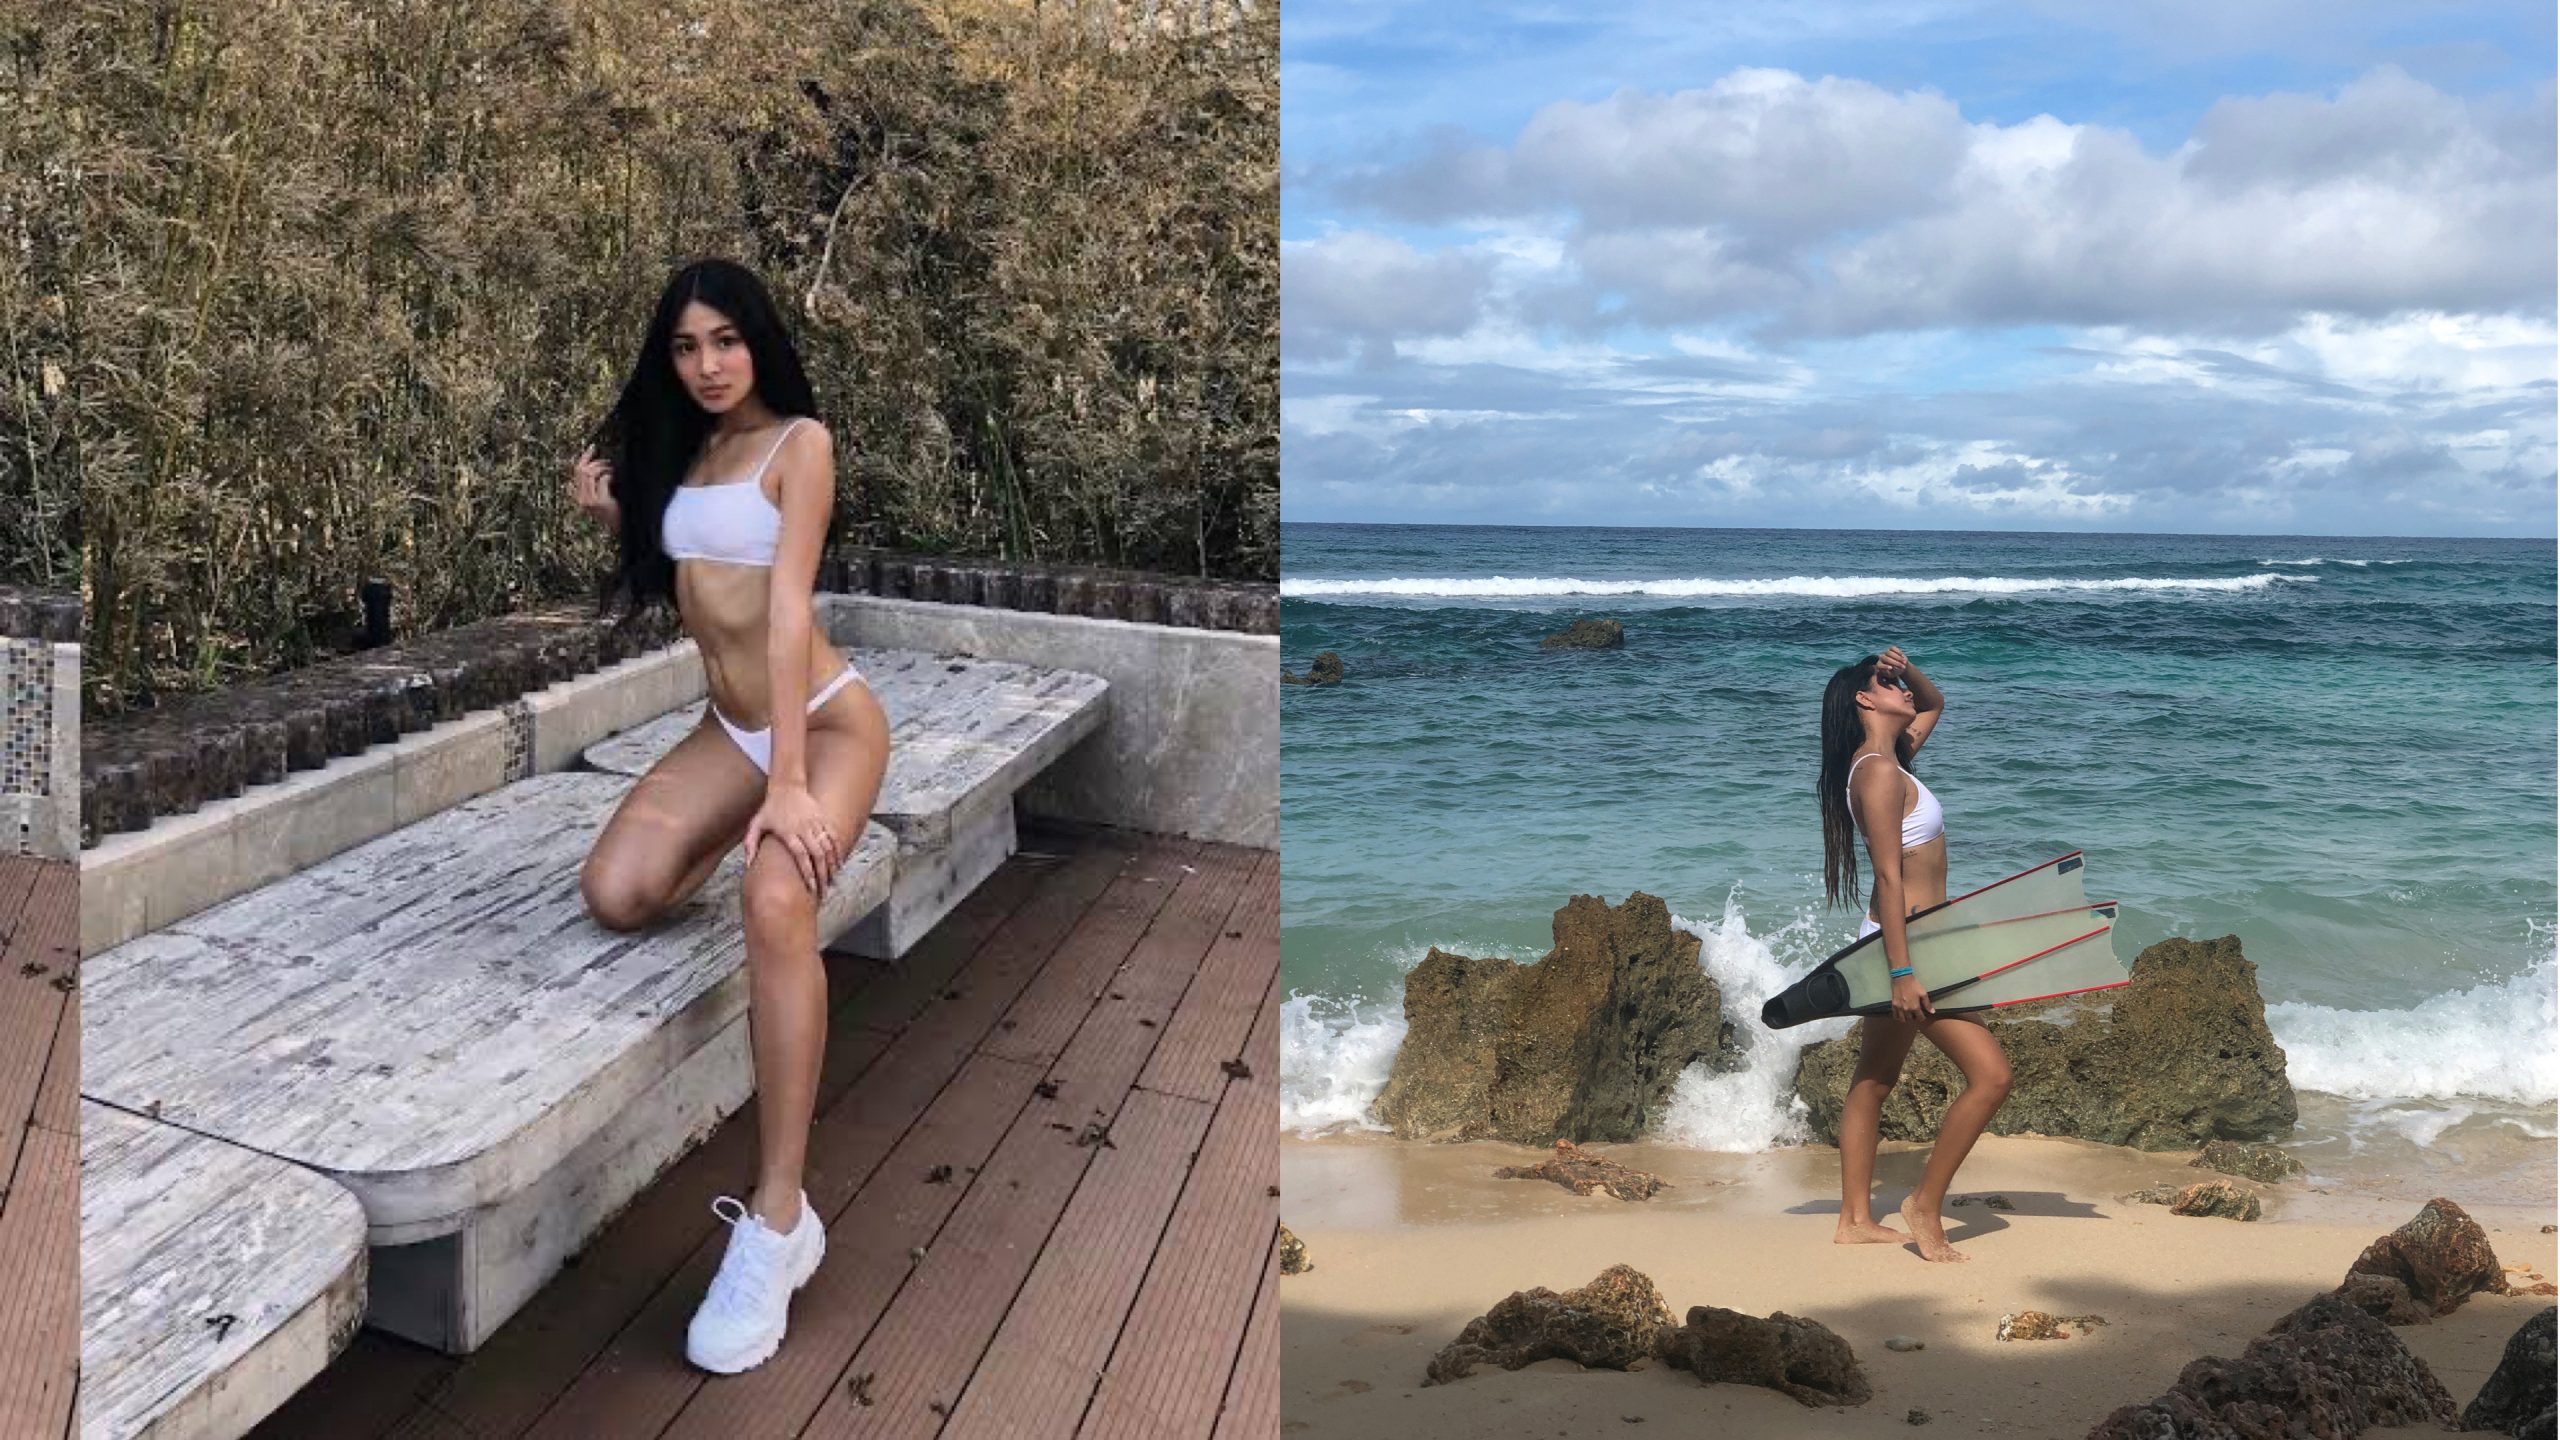 BEACH POSES FOR SHY GIRLS | Gallery posted by Rona Sales | Lemon8